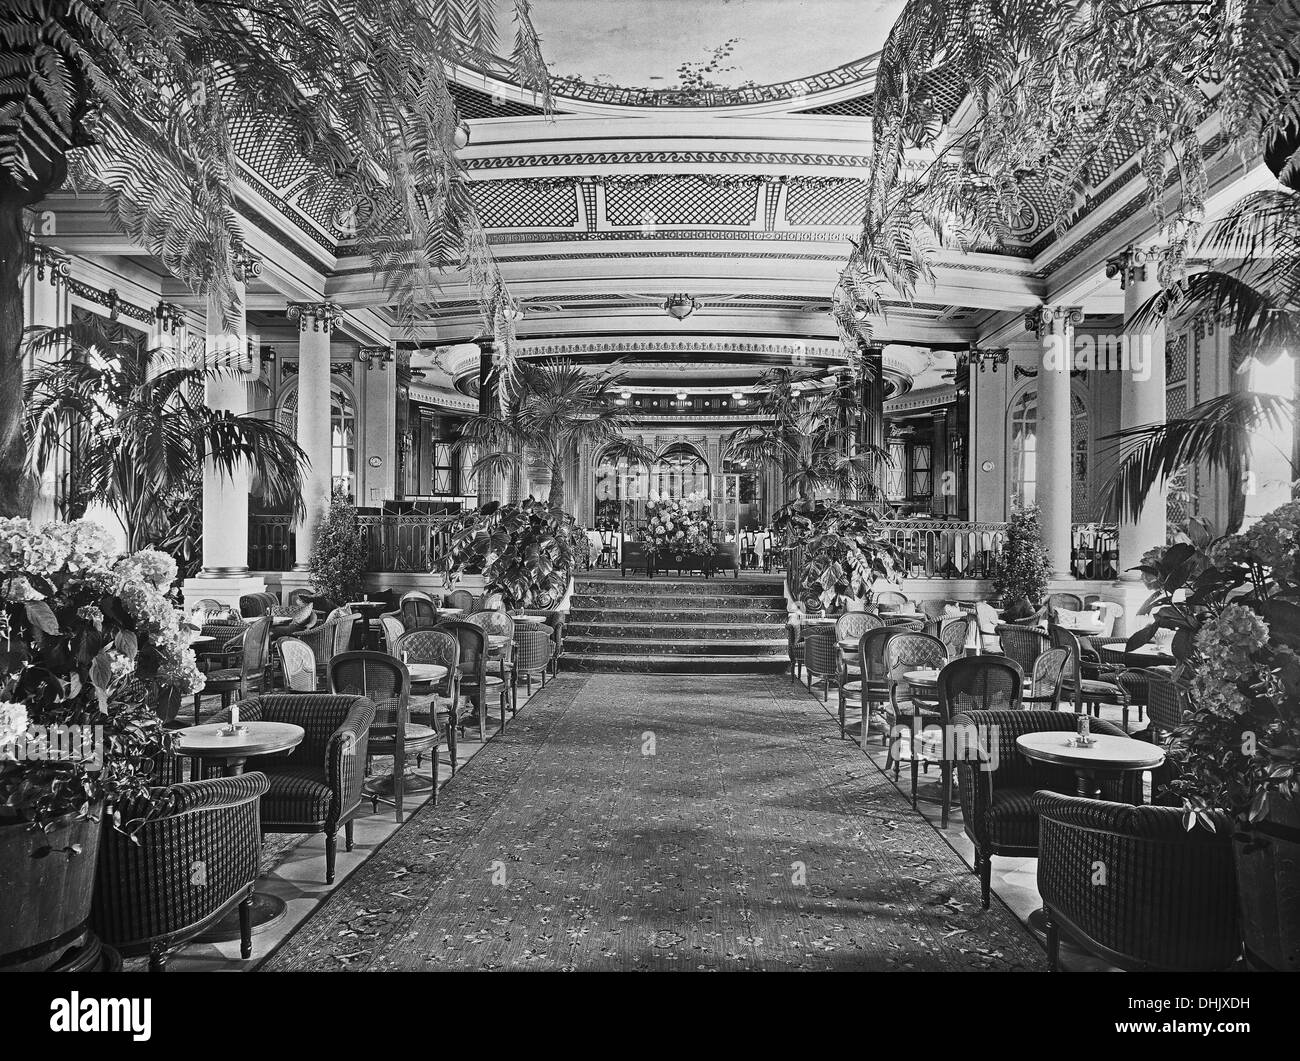 View of the conservatory (salon of the first class) on the ocean liner 'Imperator' of Hapag Hamburg (Hamburg America LIne), AG Vulcan Stettin, shipyard, photograph taken in 1913/1913. The image was taken by the German photographer Oswald Lübeck, one of the earliest representatives of travel photography and ship photography aboard passenger ships. Photo: Deutsche Fotothek/Oswald Lübeck Stock Photo